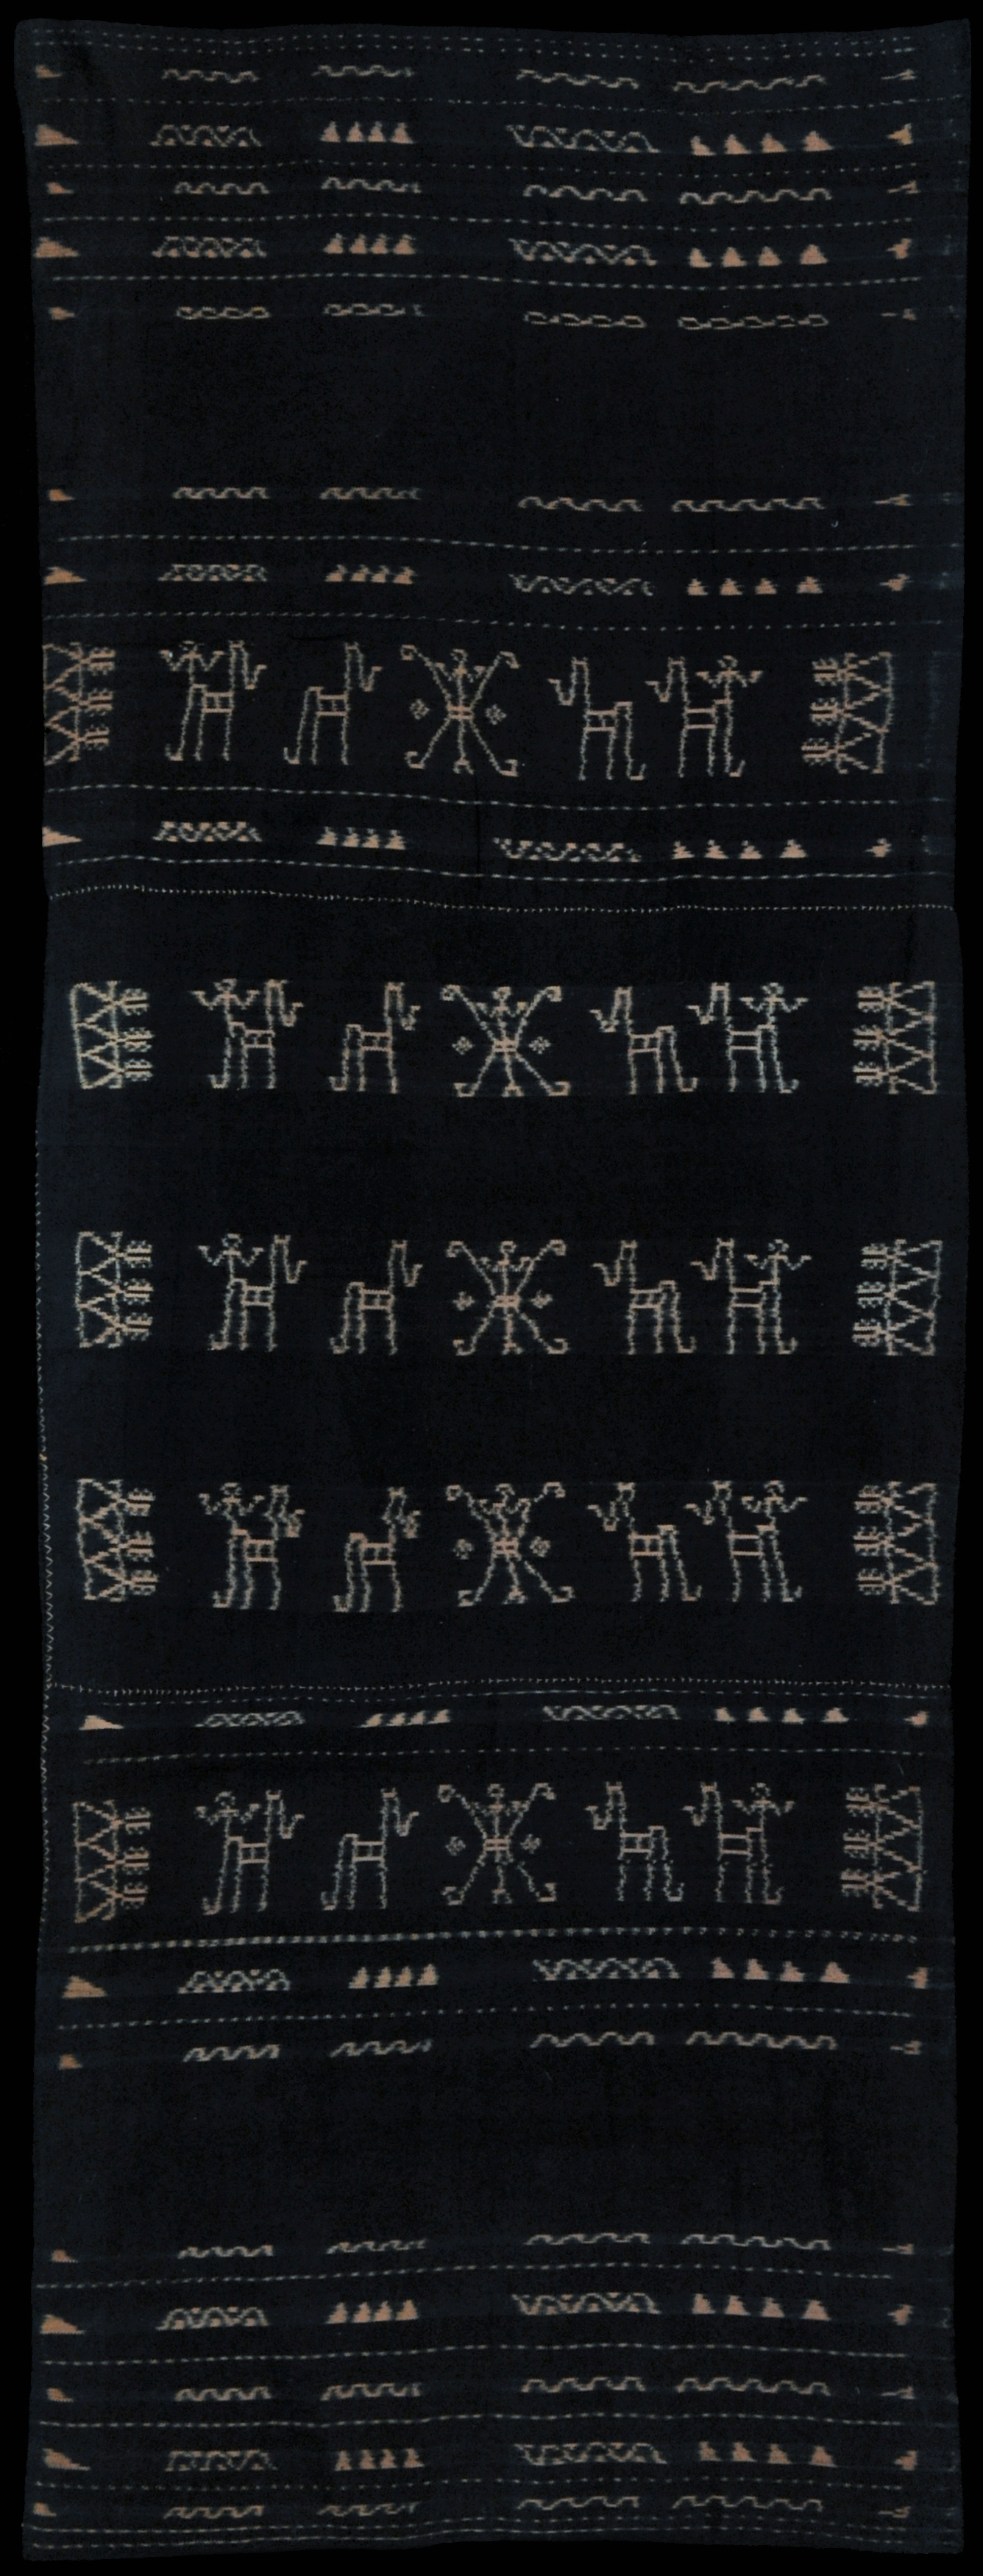 Ikat from Ngadha, Flores Group, Indonesia